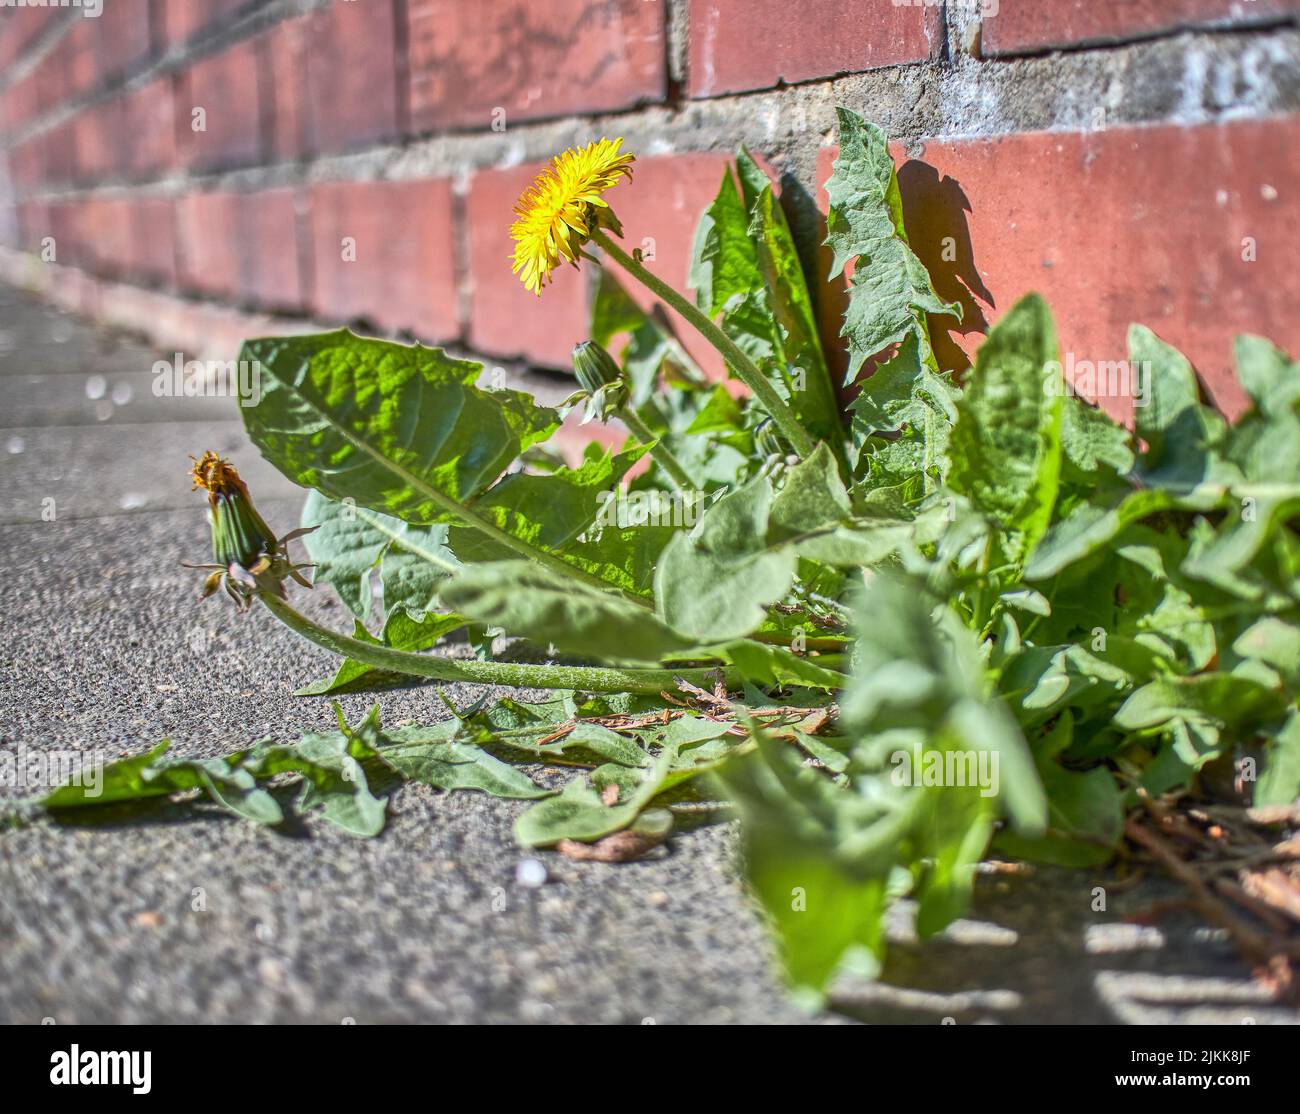 A closeup shot of a common sowthistle (Sonchus oleraceus) growing near the brick wall Stock Photo